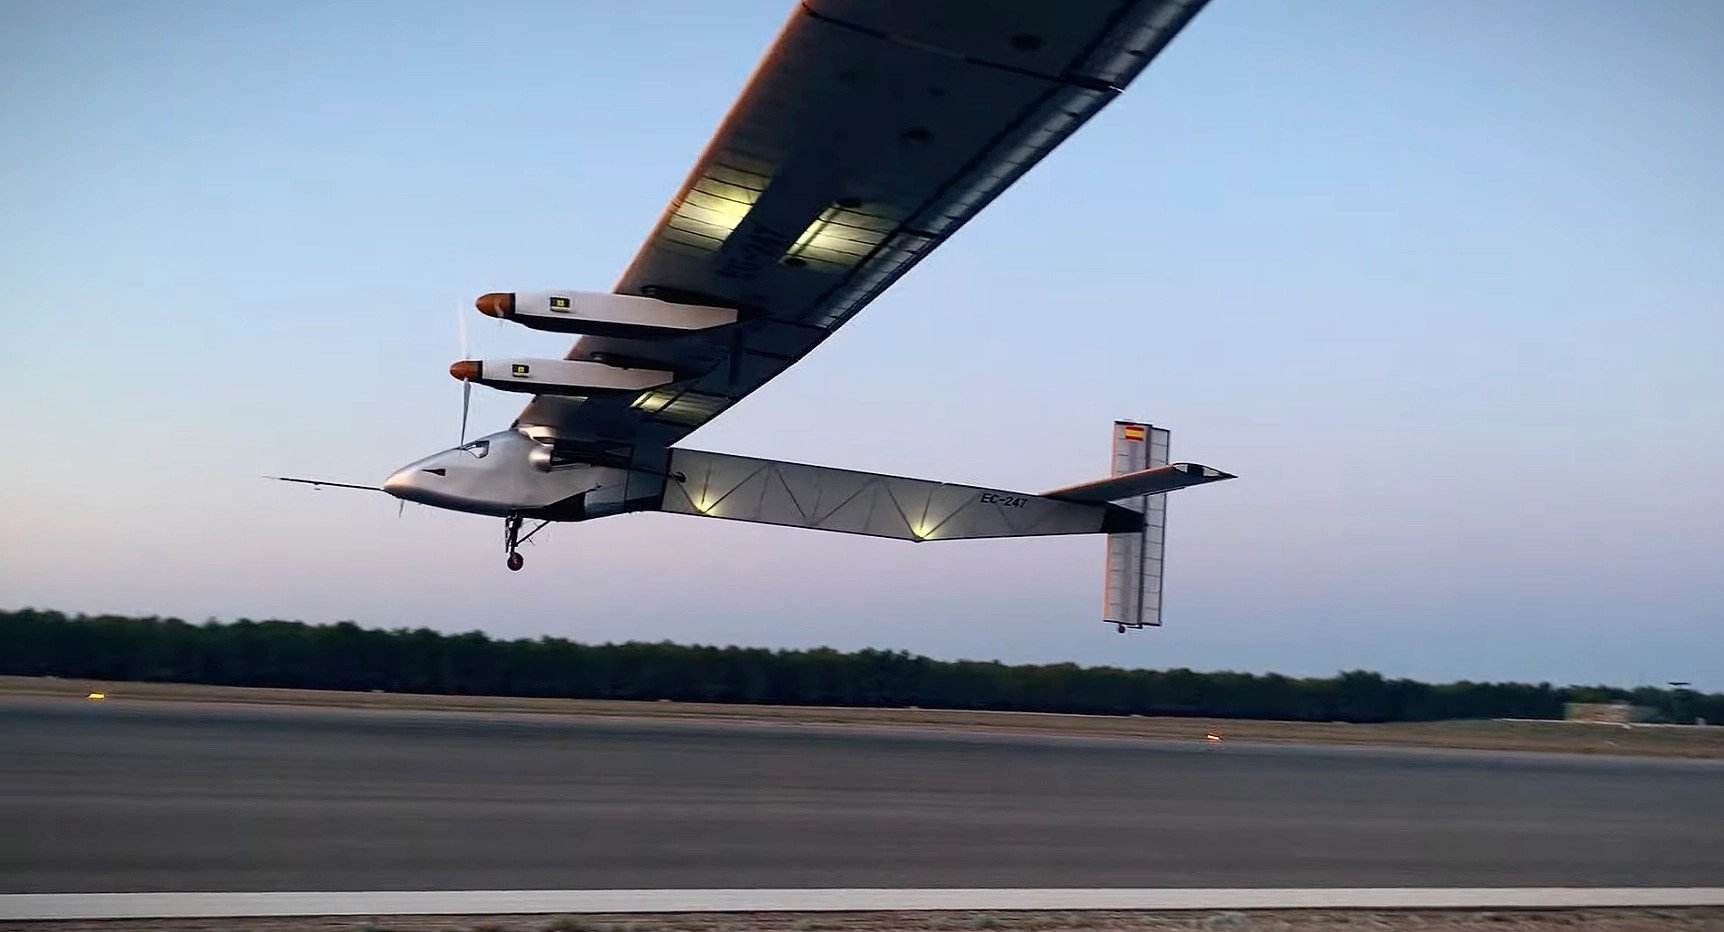 The U.S. Navy's unmanned, solar-powered Skydweller aircraft taking off.